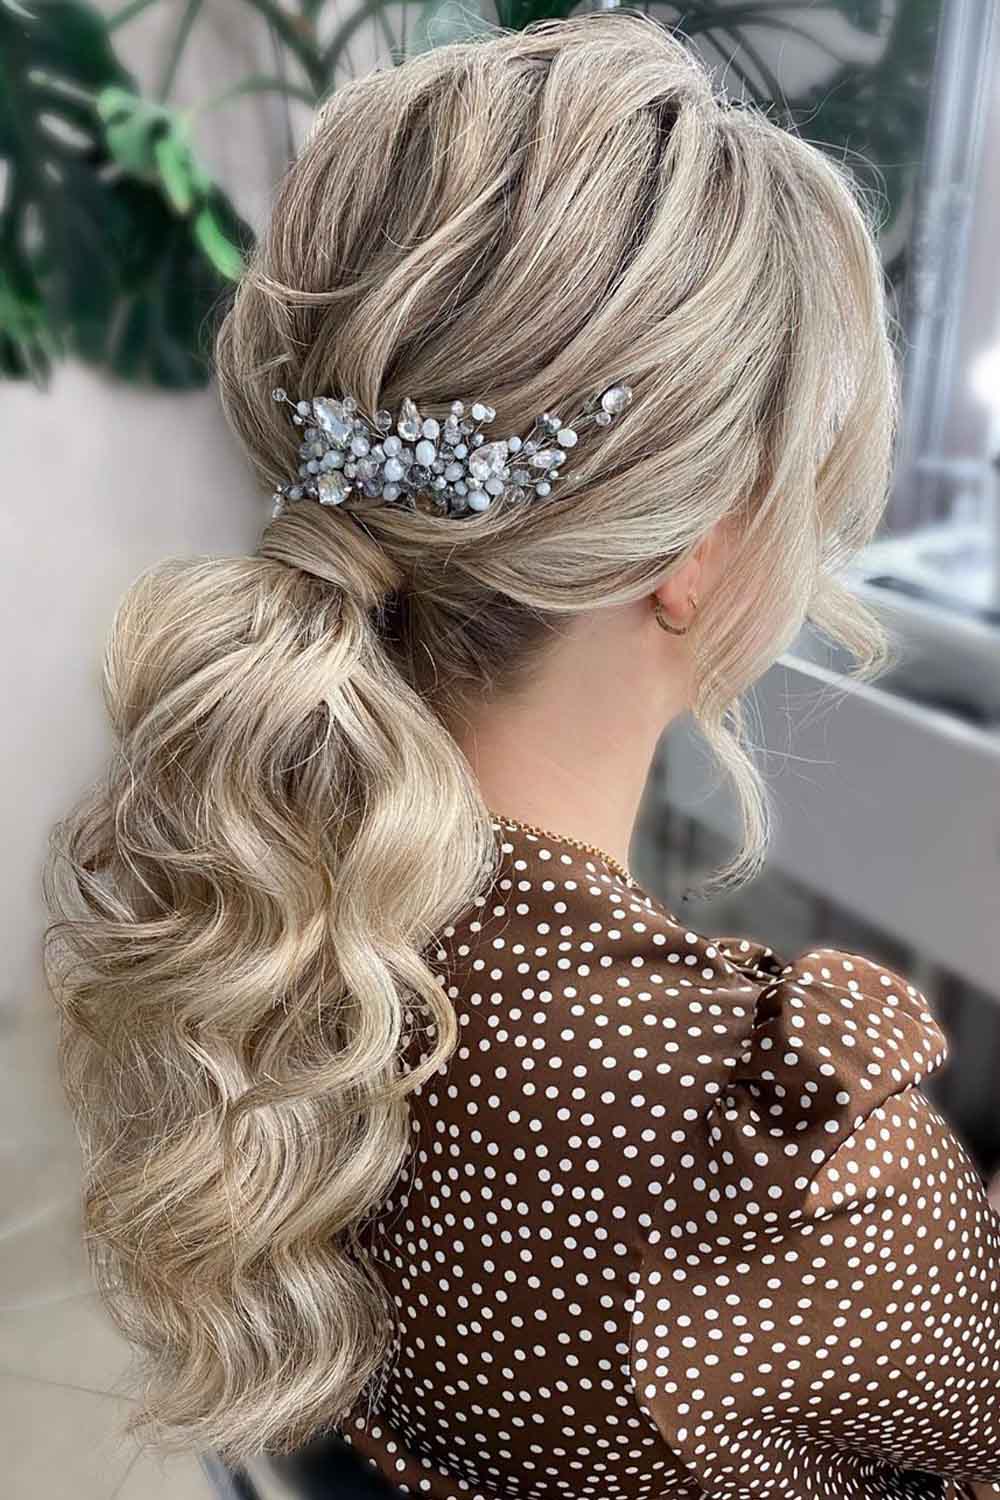 Curly Blonde Ponytail Mother Of The Bride Hairstyle